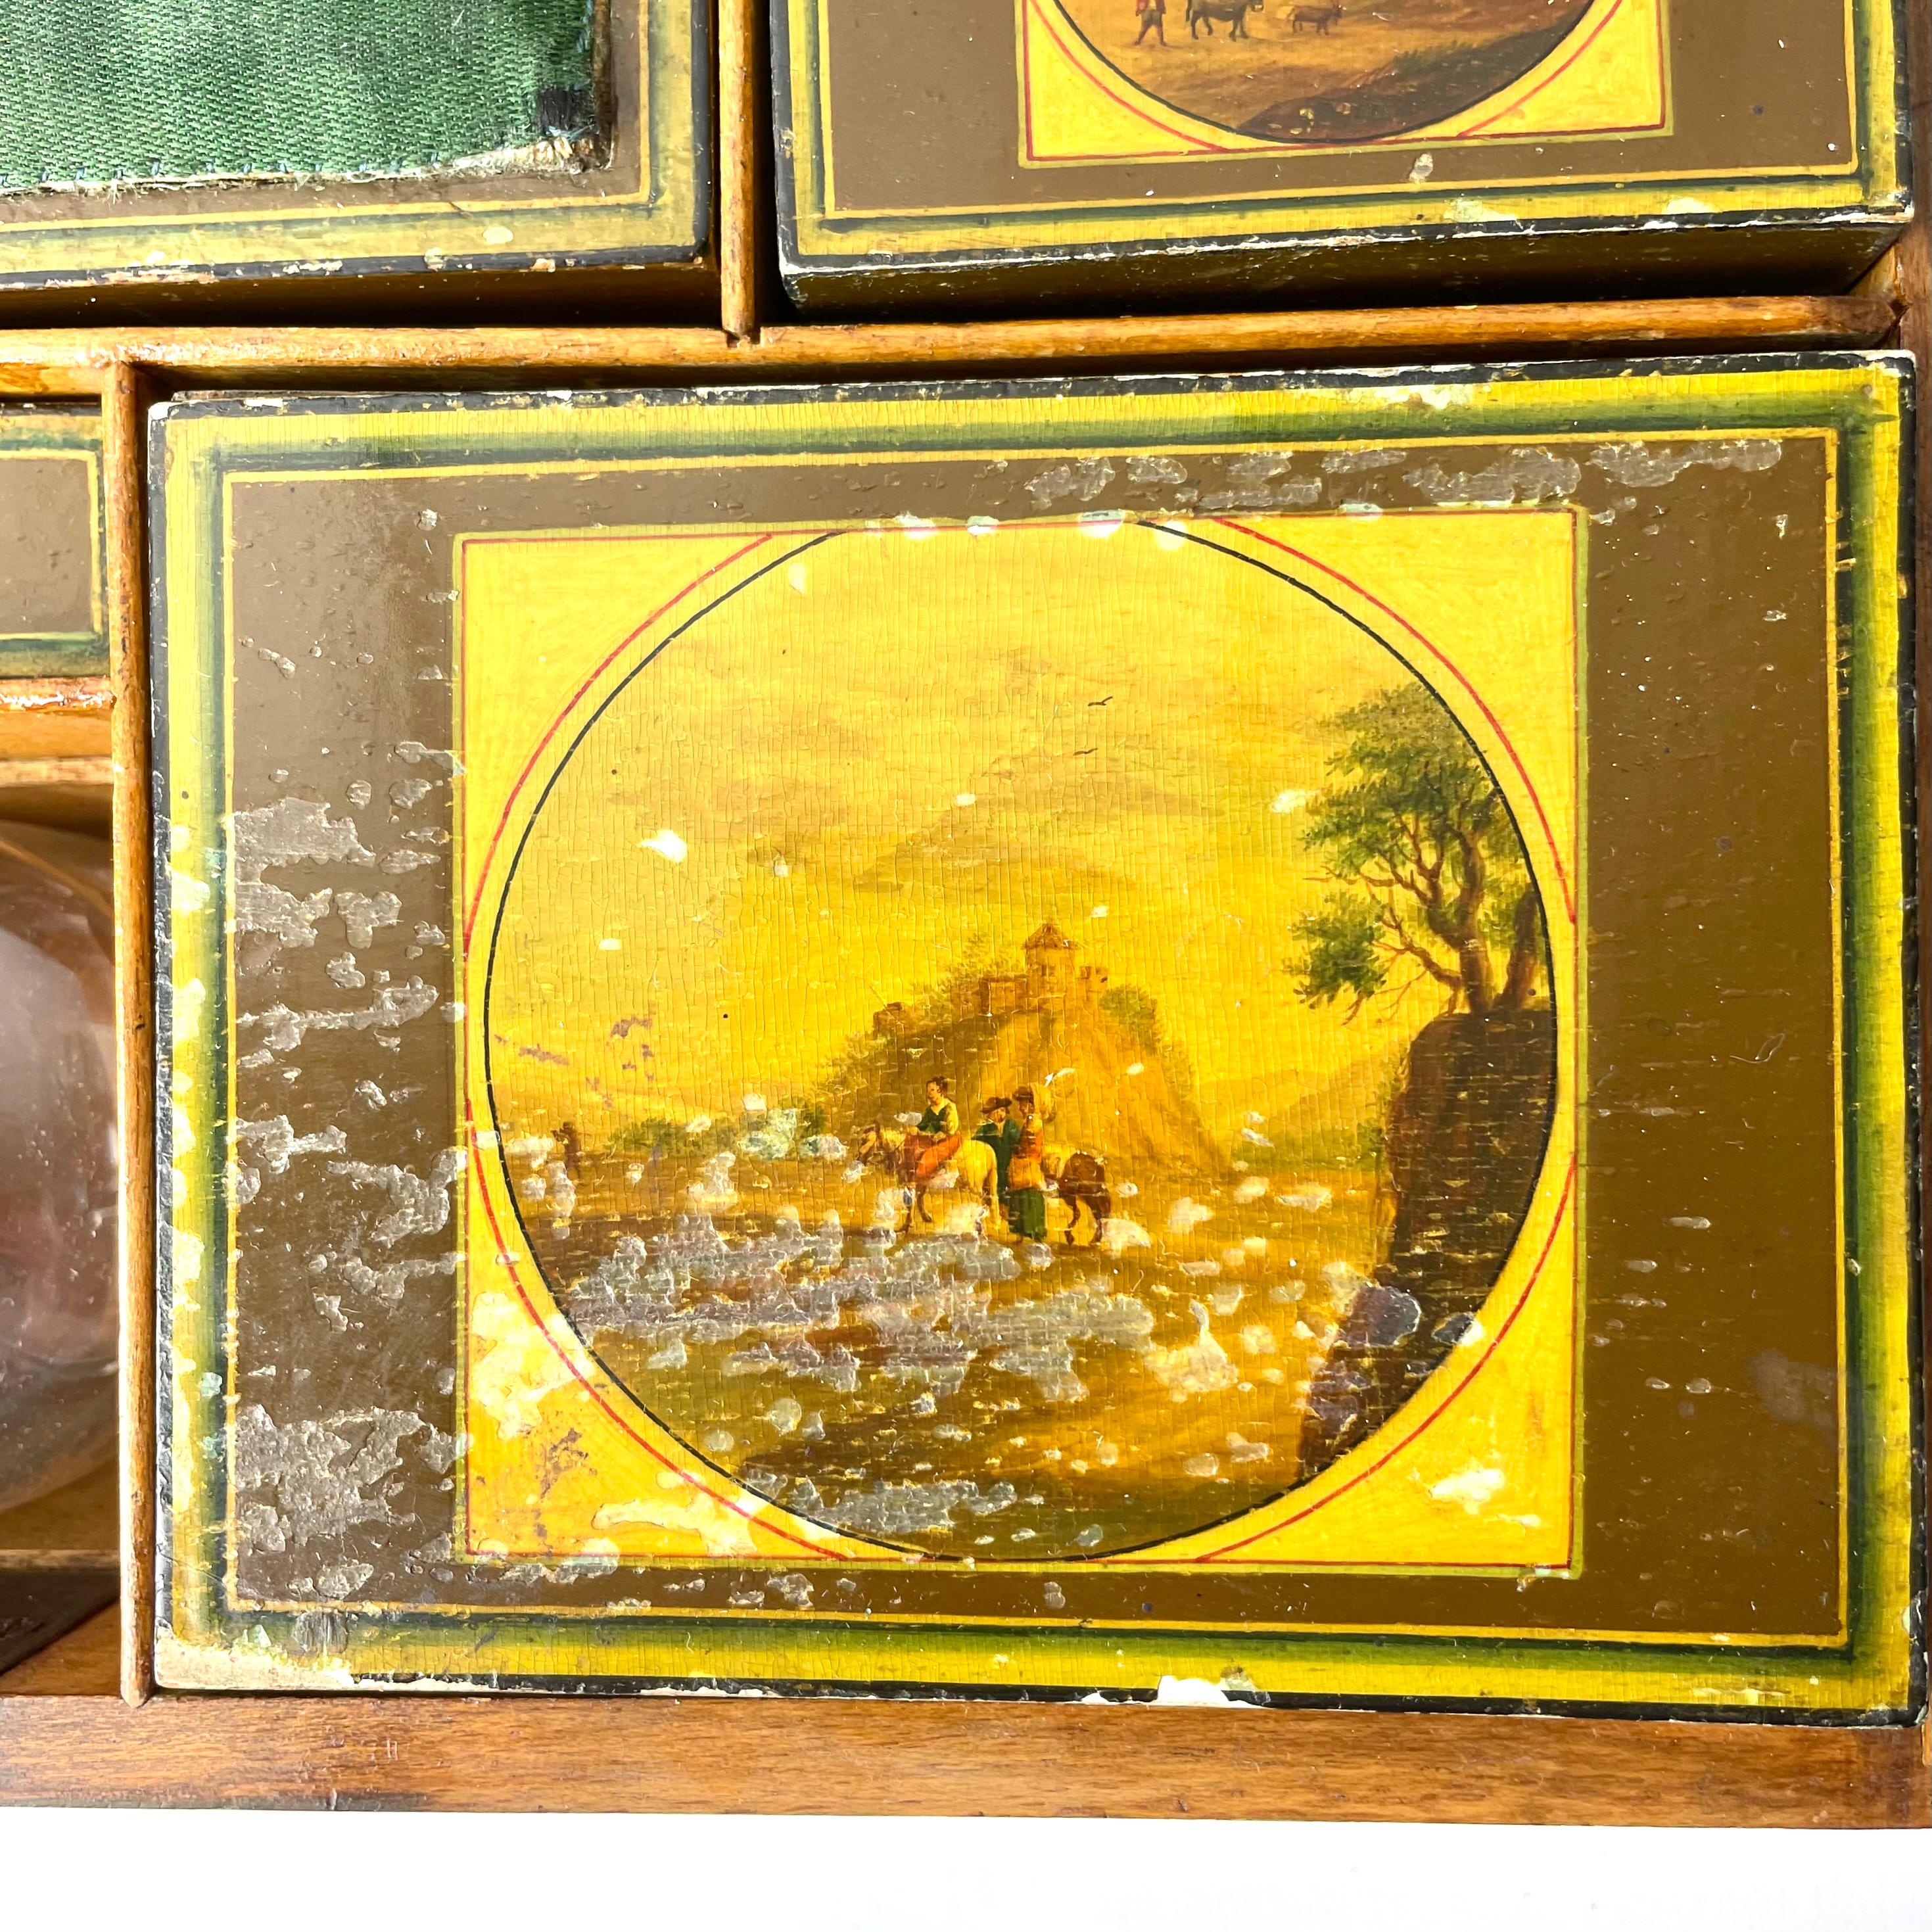 Large Sewing Box Lacquer Work with Pastoral Scenes, Early 19th Century For Sale 6